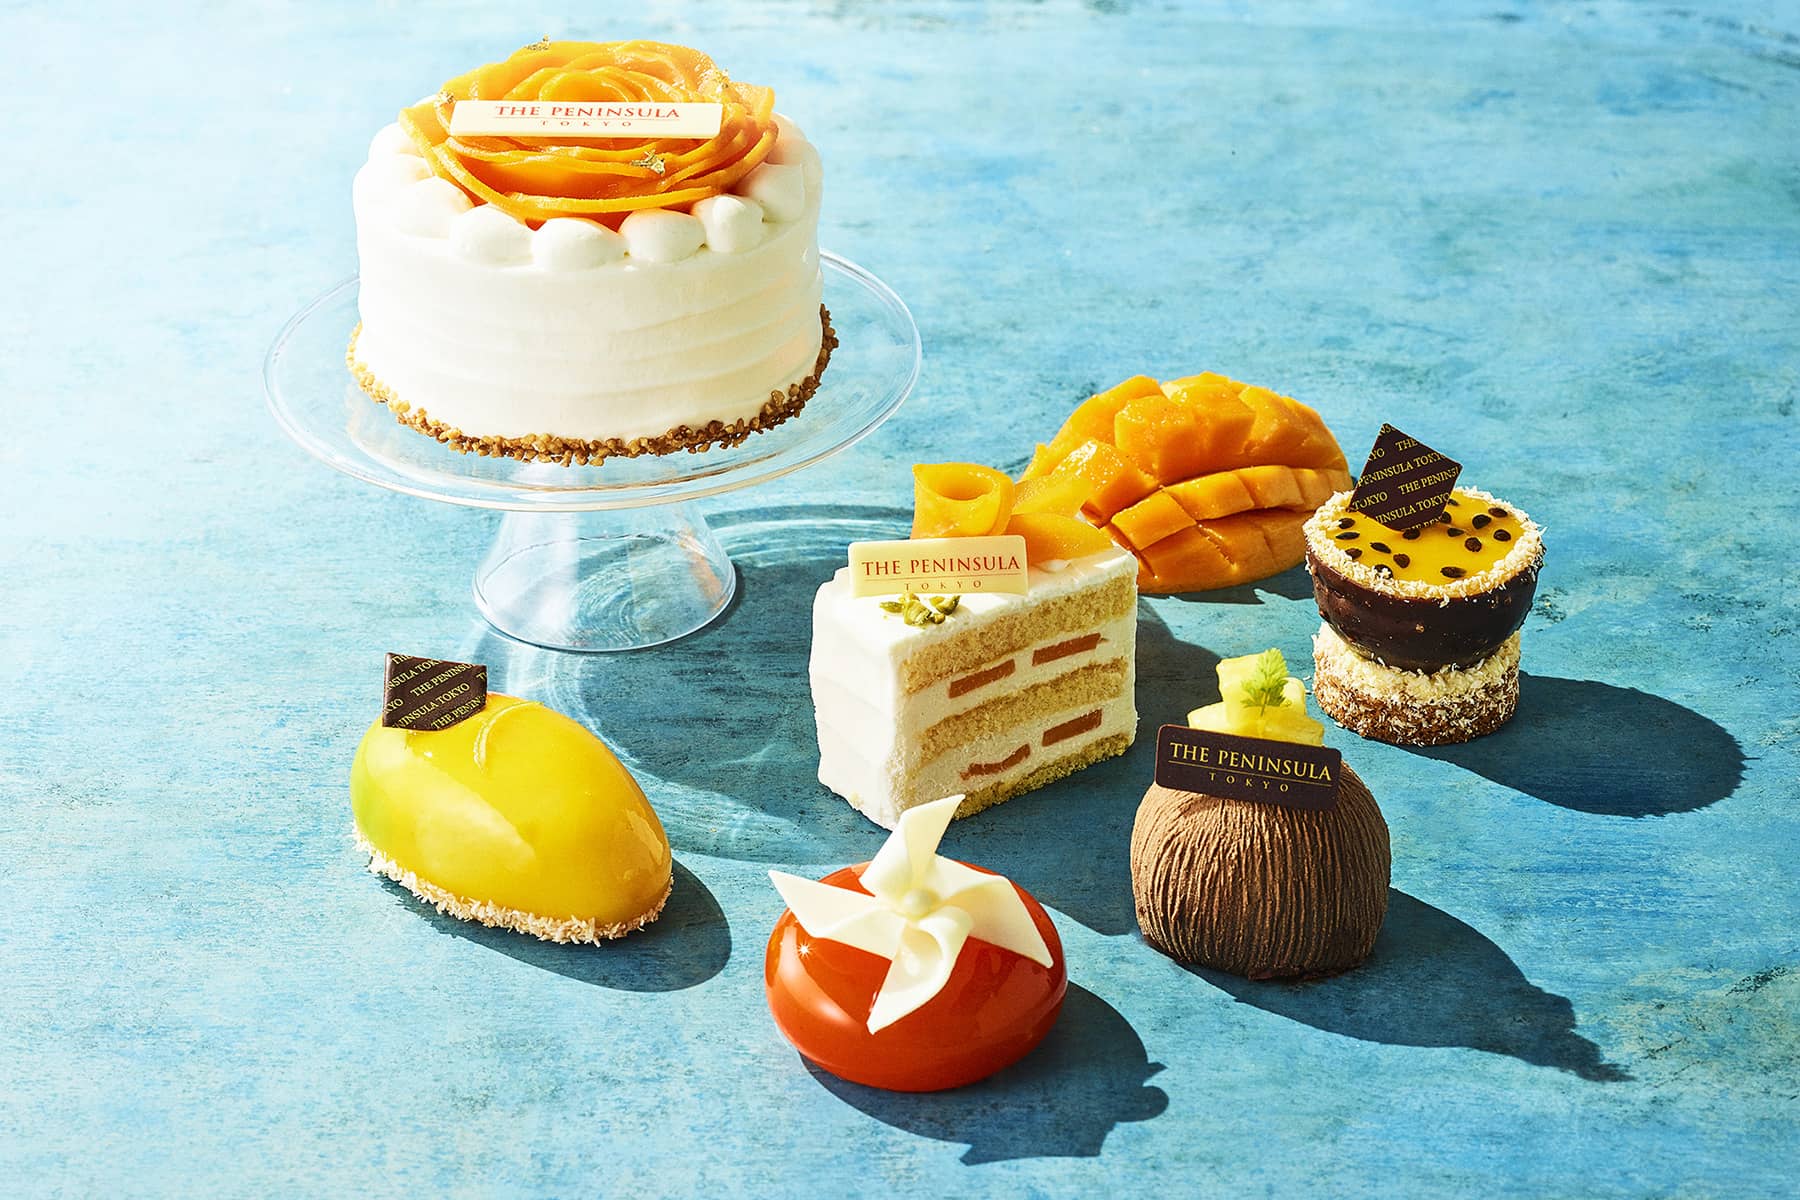 Confections and afternoon tea basked in tropical zest and colors